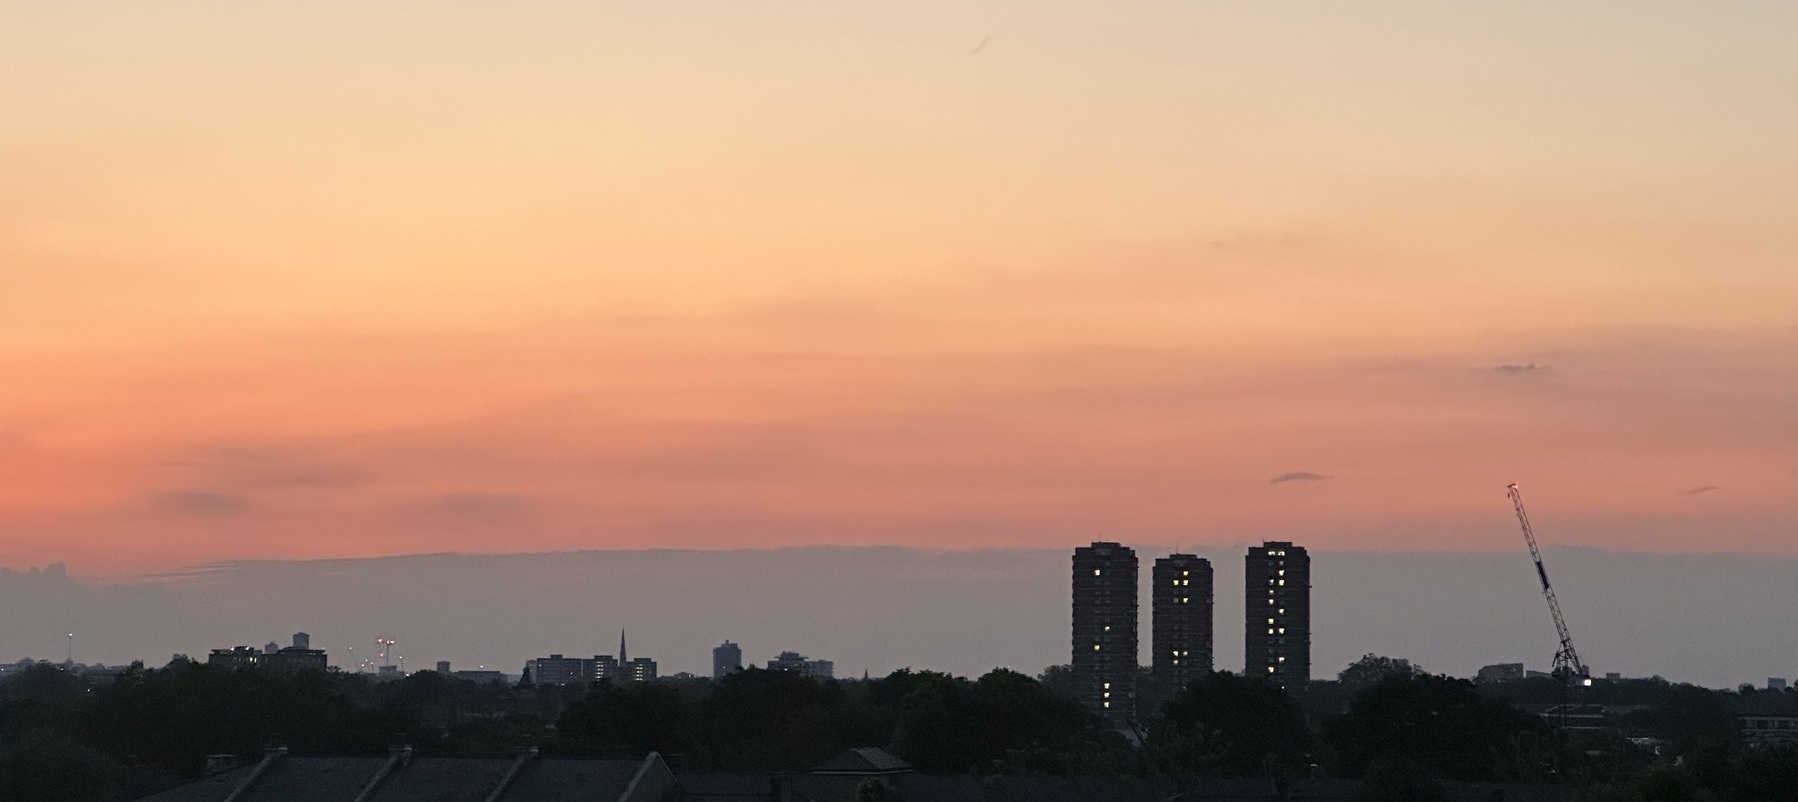 A photo of the sky at sunset. Darkish clouds are along the horizon, and above them a gradient changing from red to yellow in muted colours. Three tower blocks and a crane reach in to the sky on the right of the horizon.